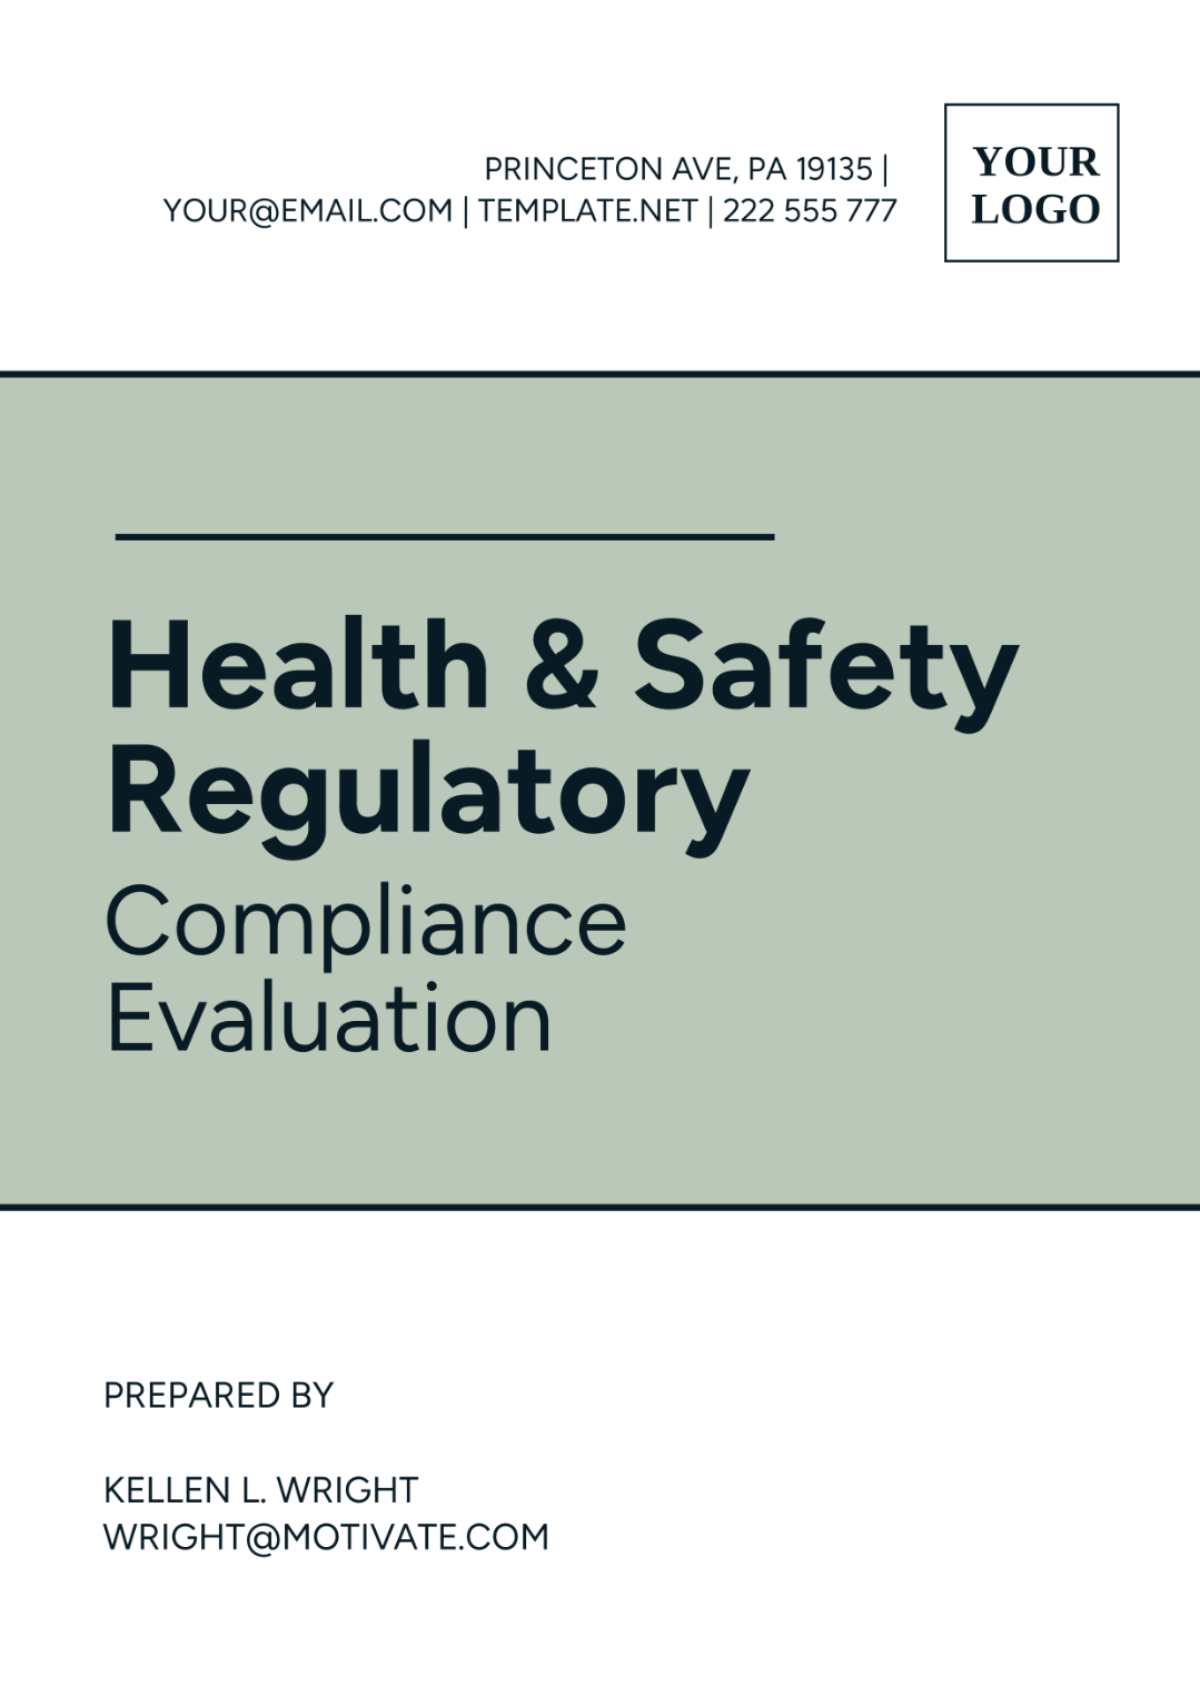 Health & Safety Regulatory Compliance Evaluation Template